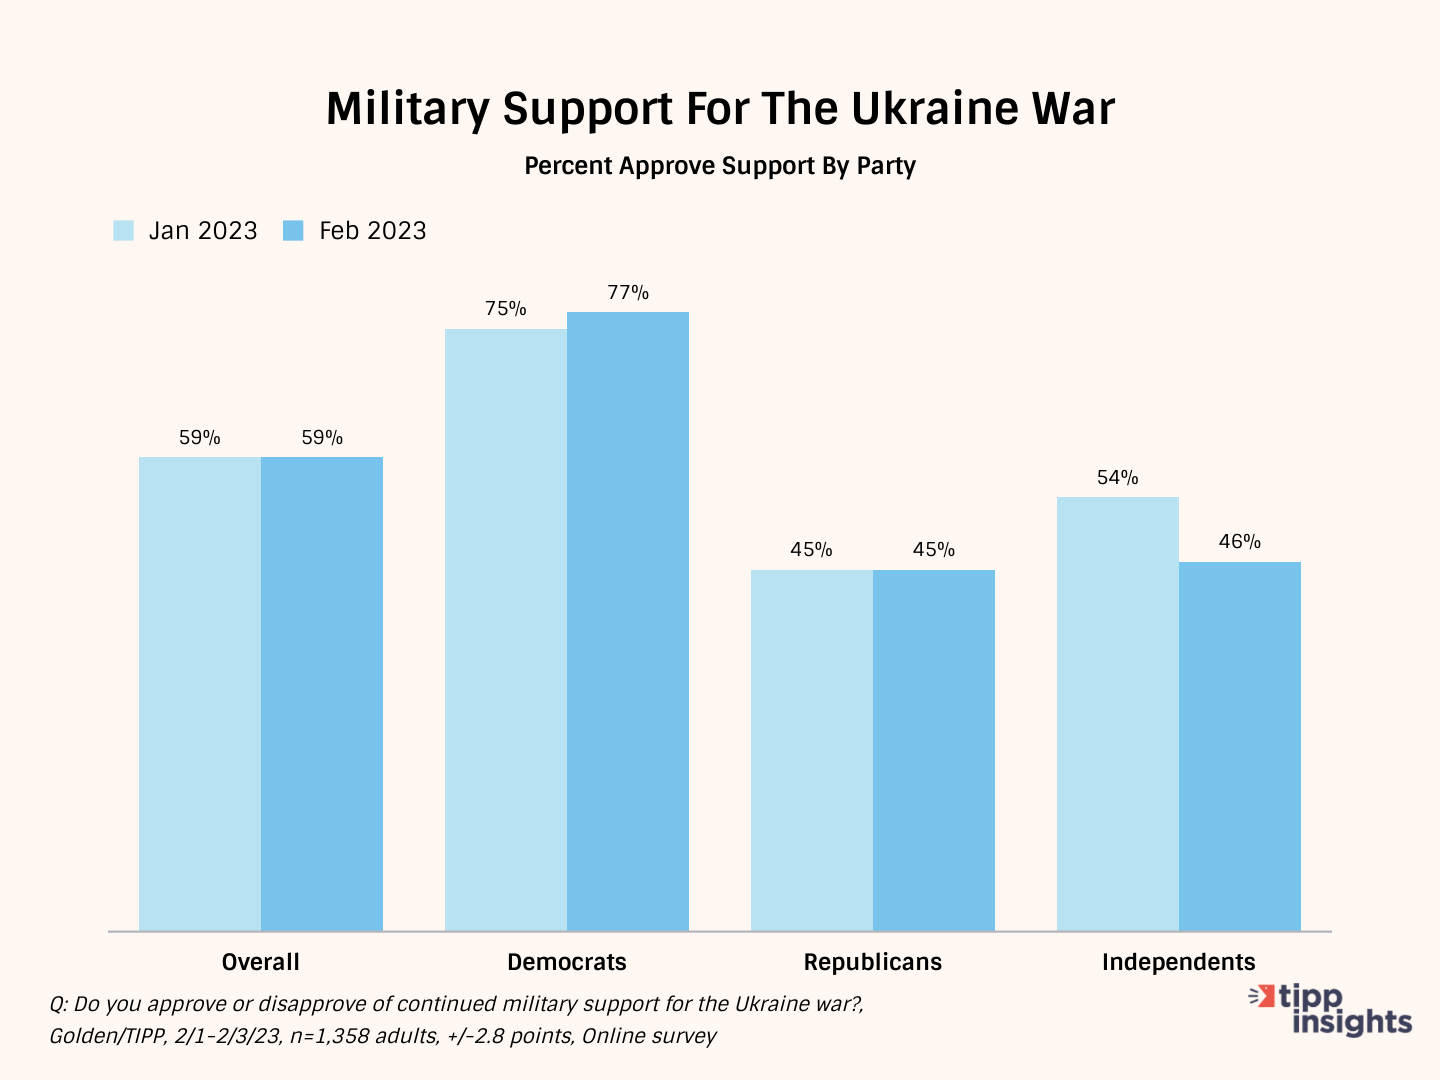 Americans Approve Continued Military Aid For Ukraine: Golden/TIPP Poll